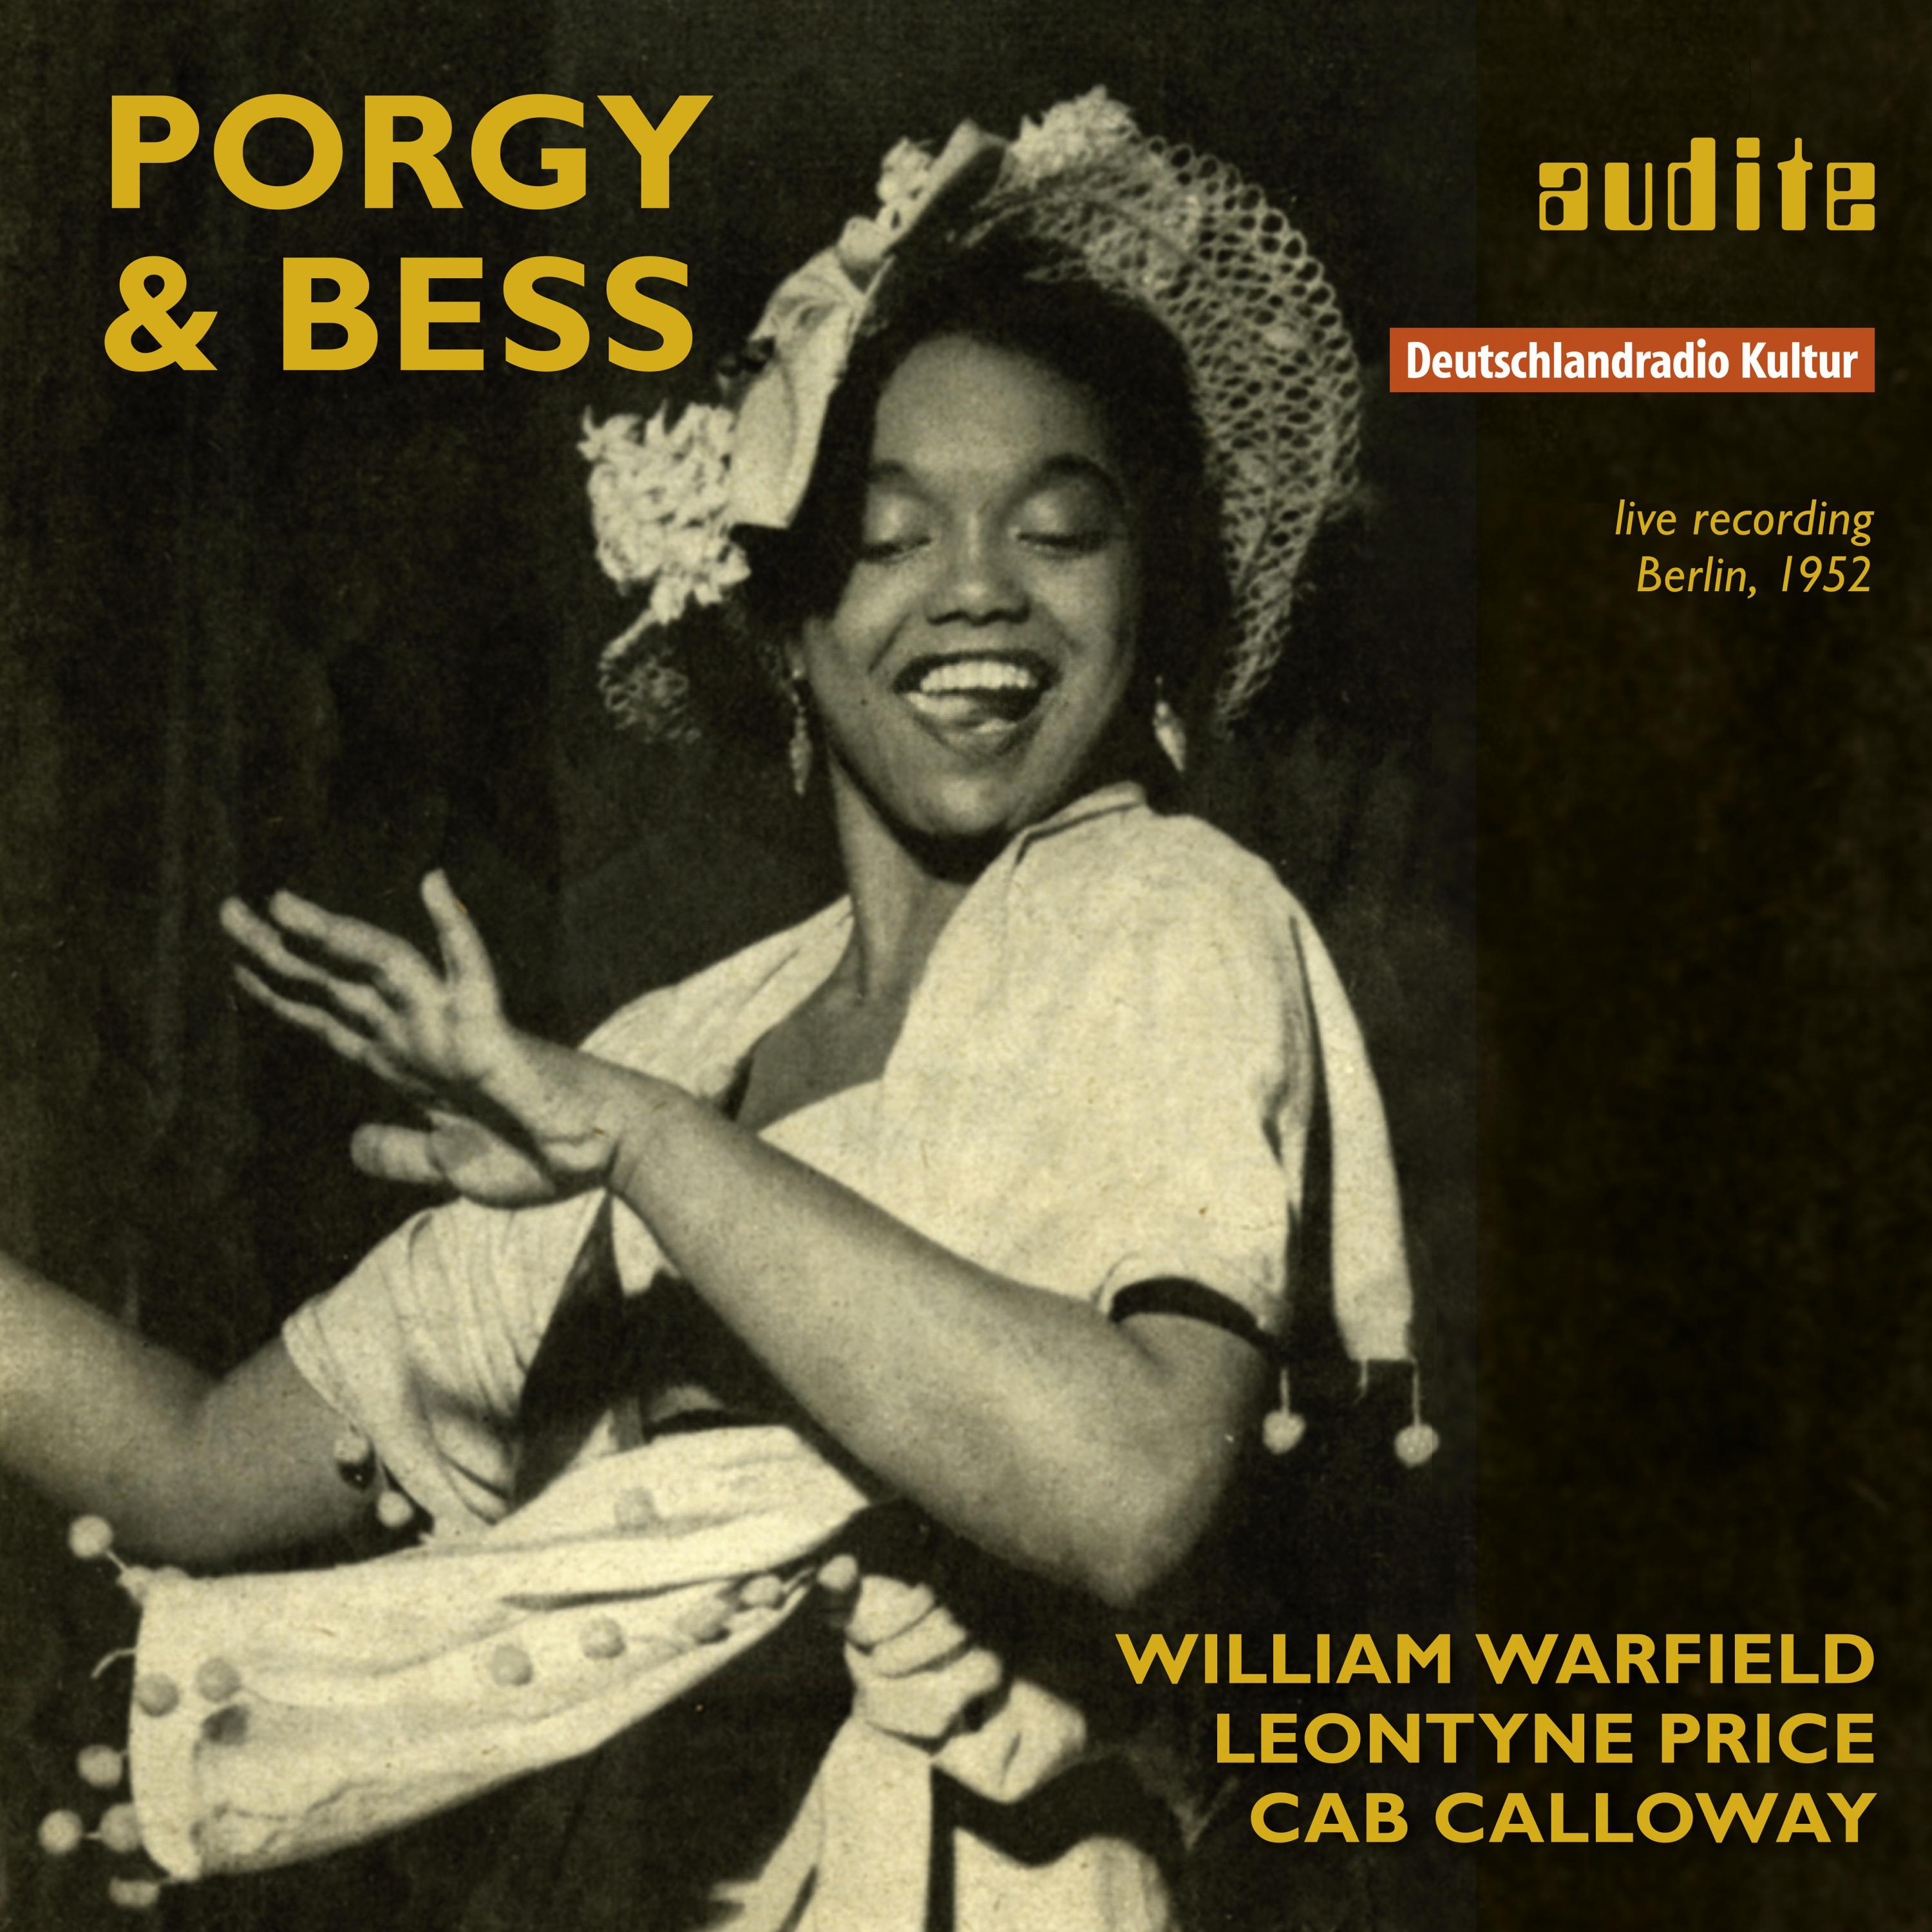 Porgy and Bess - Act One, Scene II: Come on sister - Overflow (Live)